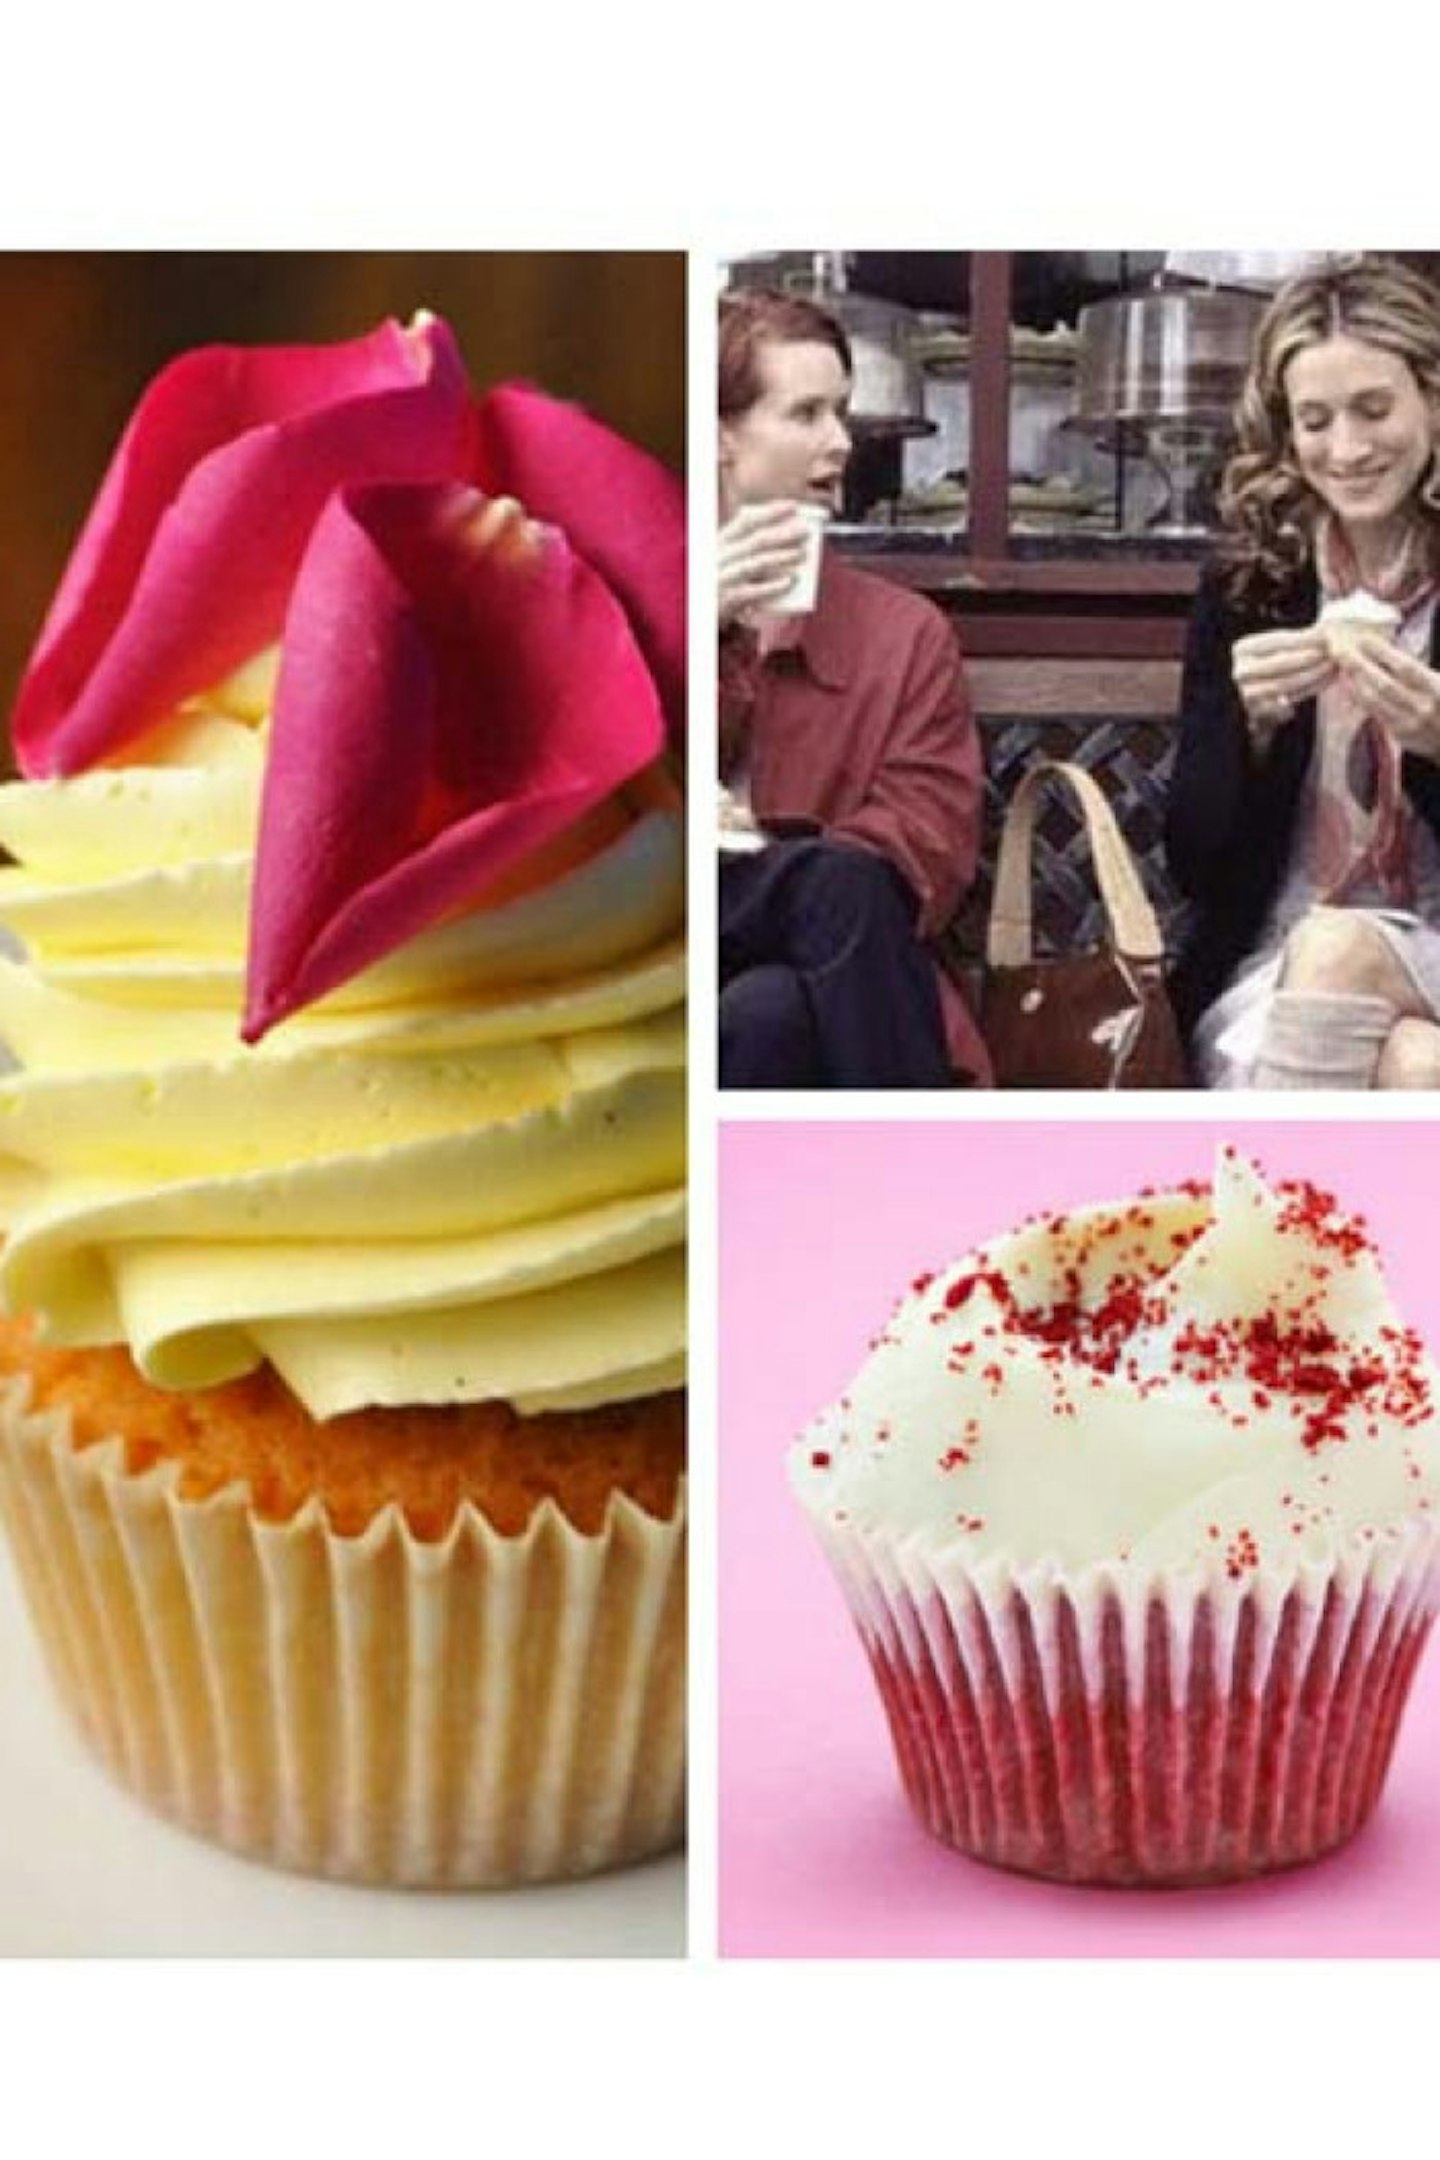 CLICK HERE FOR OUR 10 FAVOURITE CUPCAKES